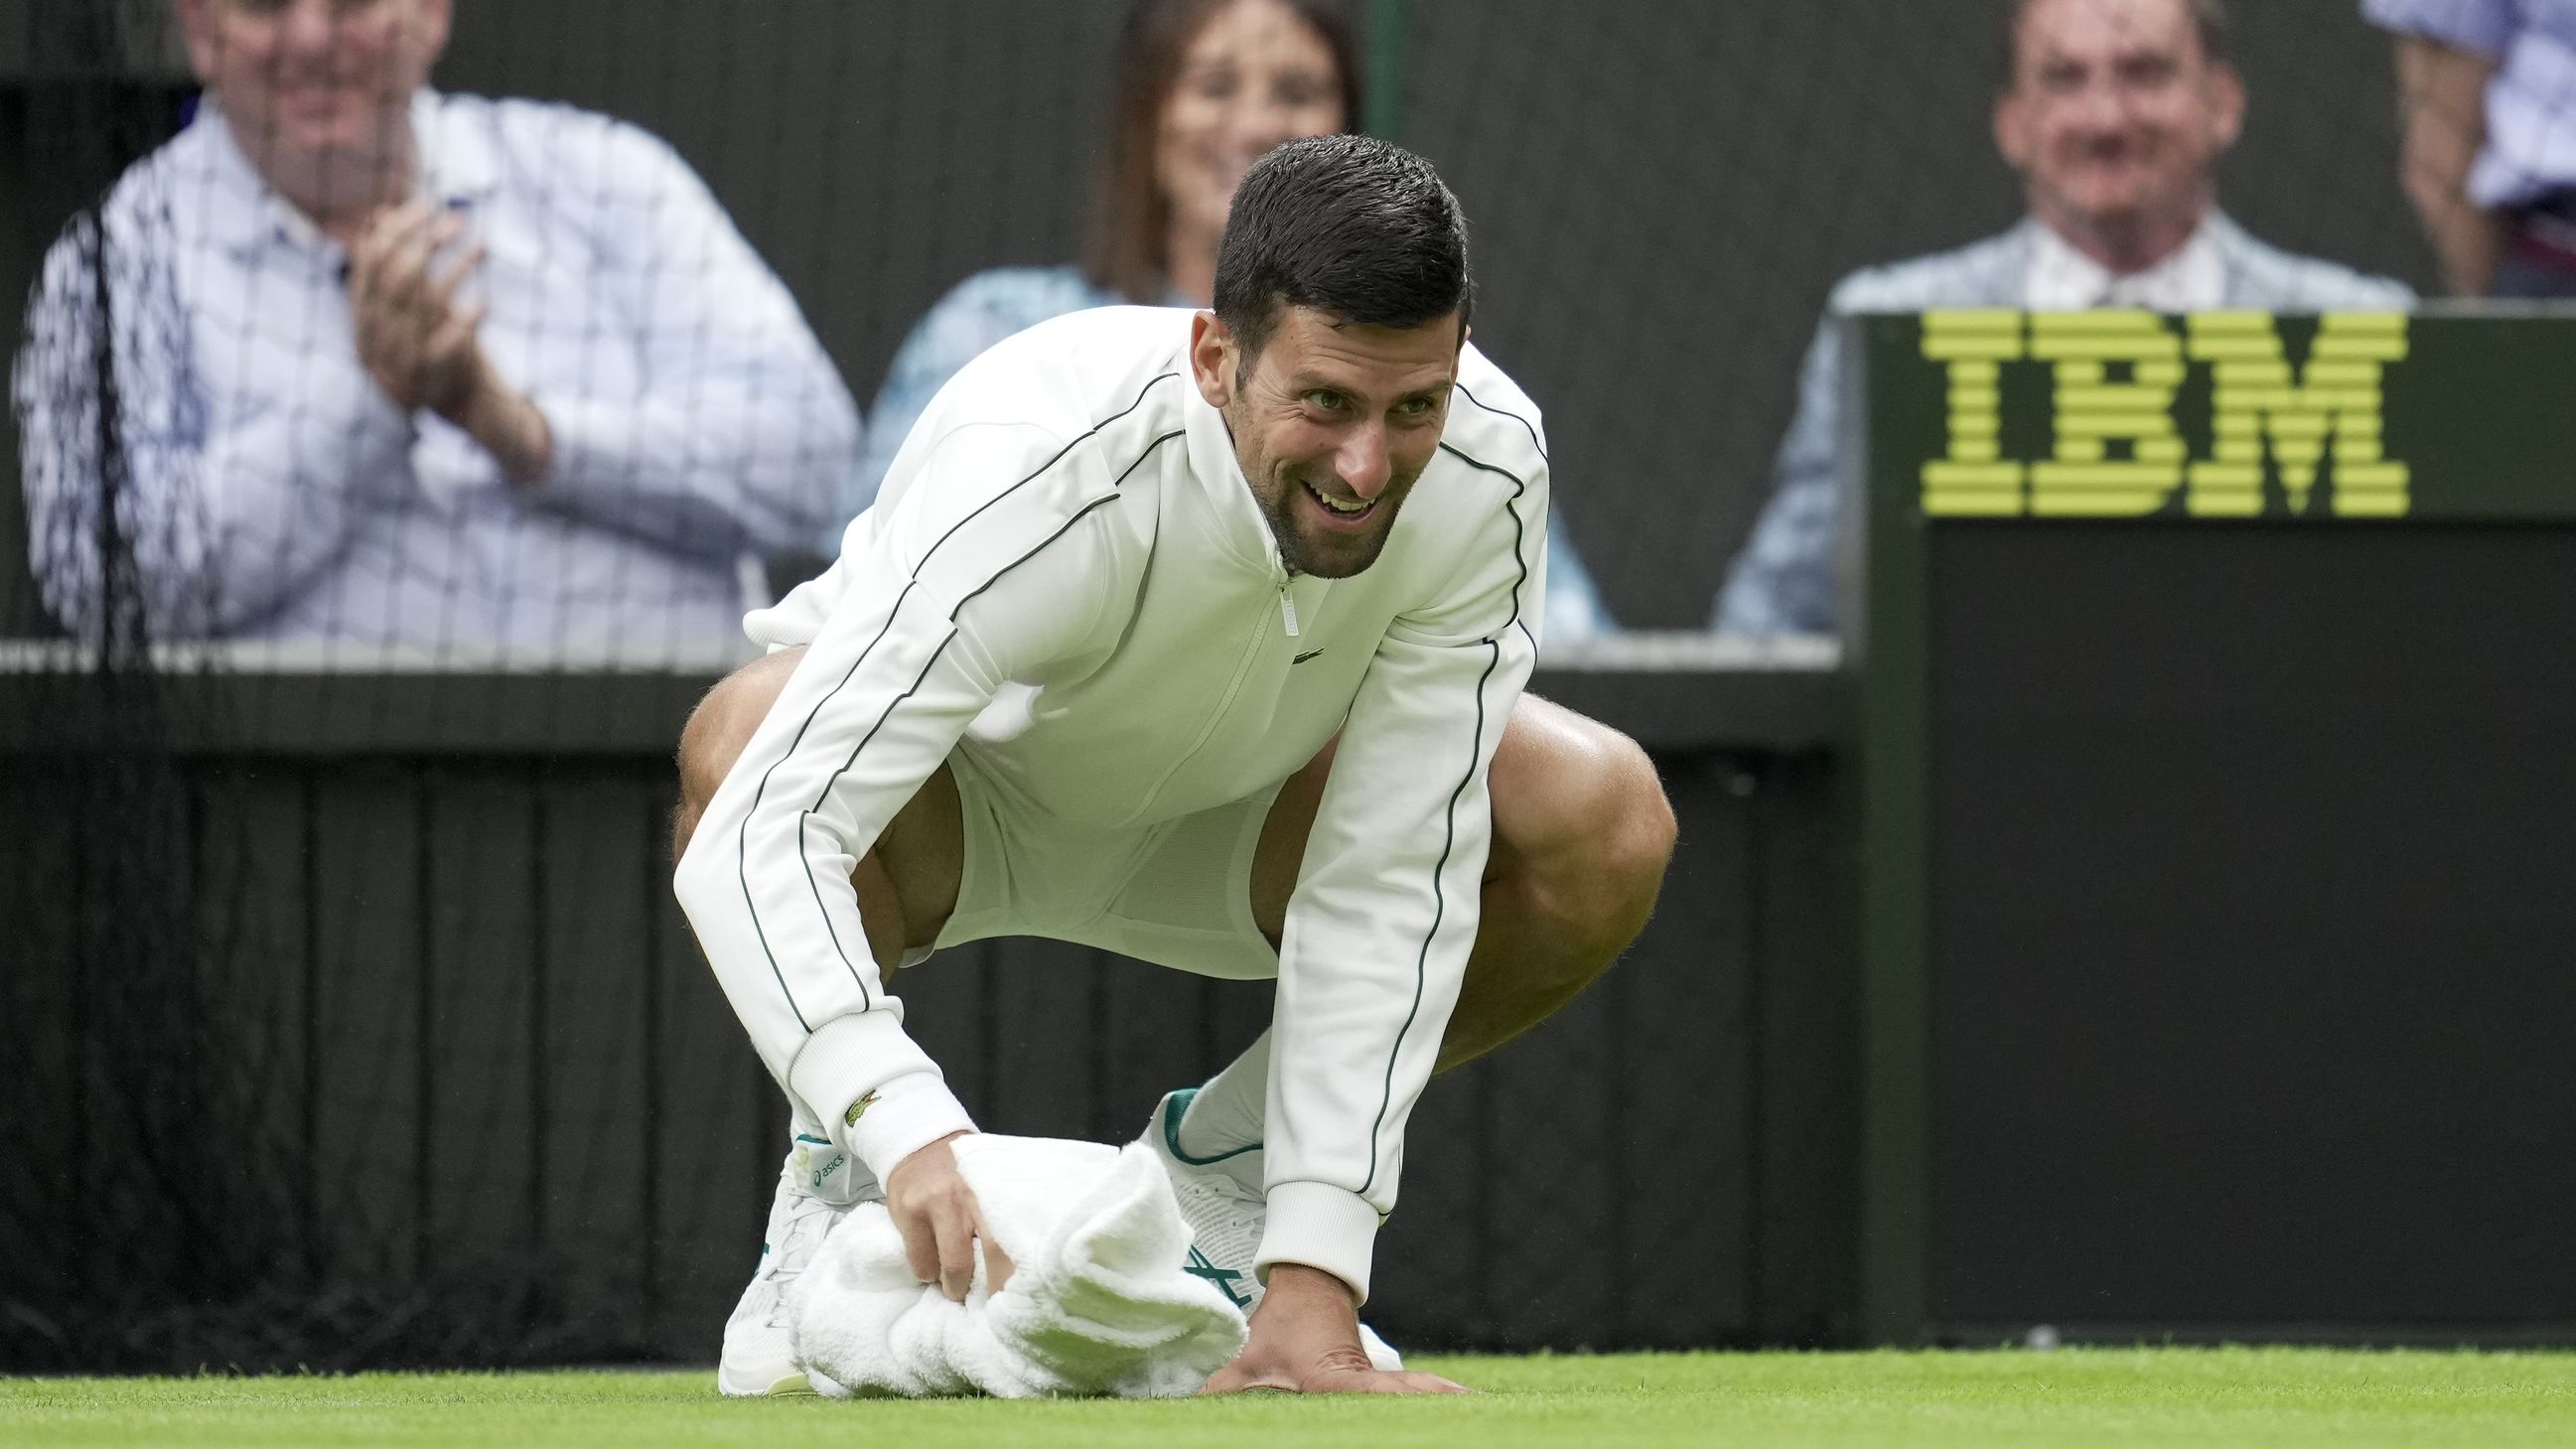 Novak Djokovic wipes the court with his towel after rain fell on day one, much to the amusement of courtside fans.